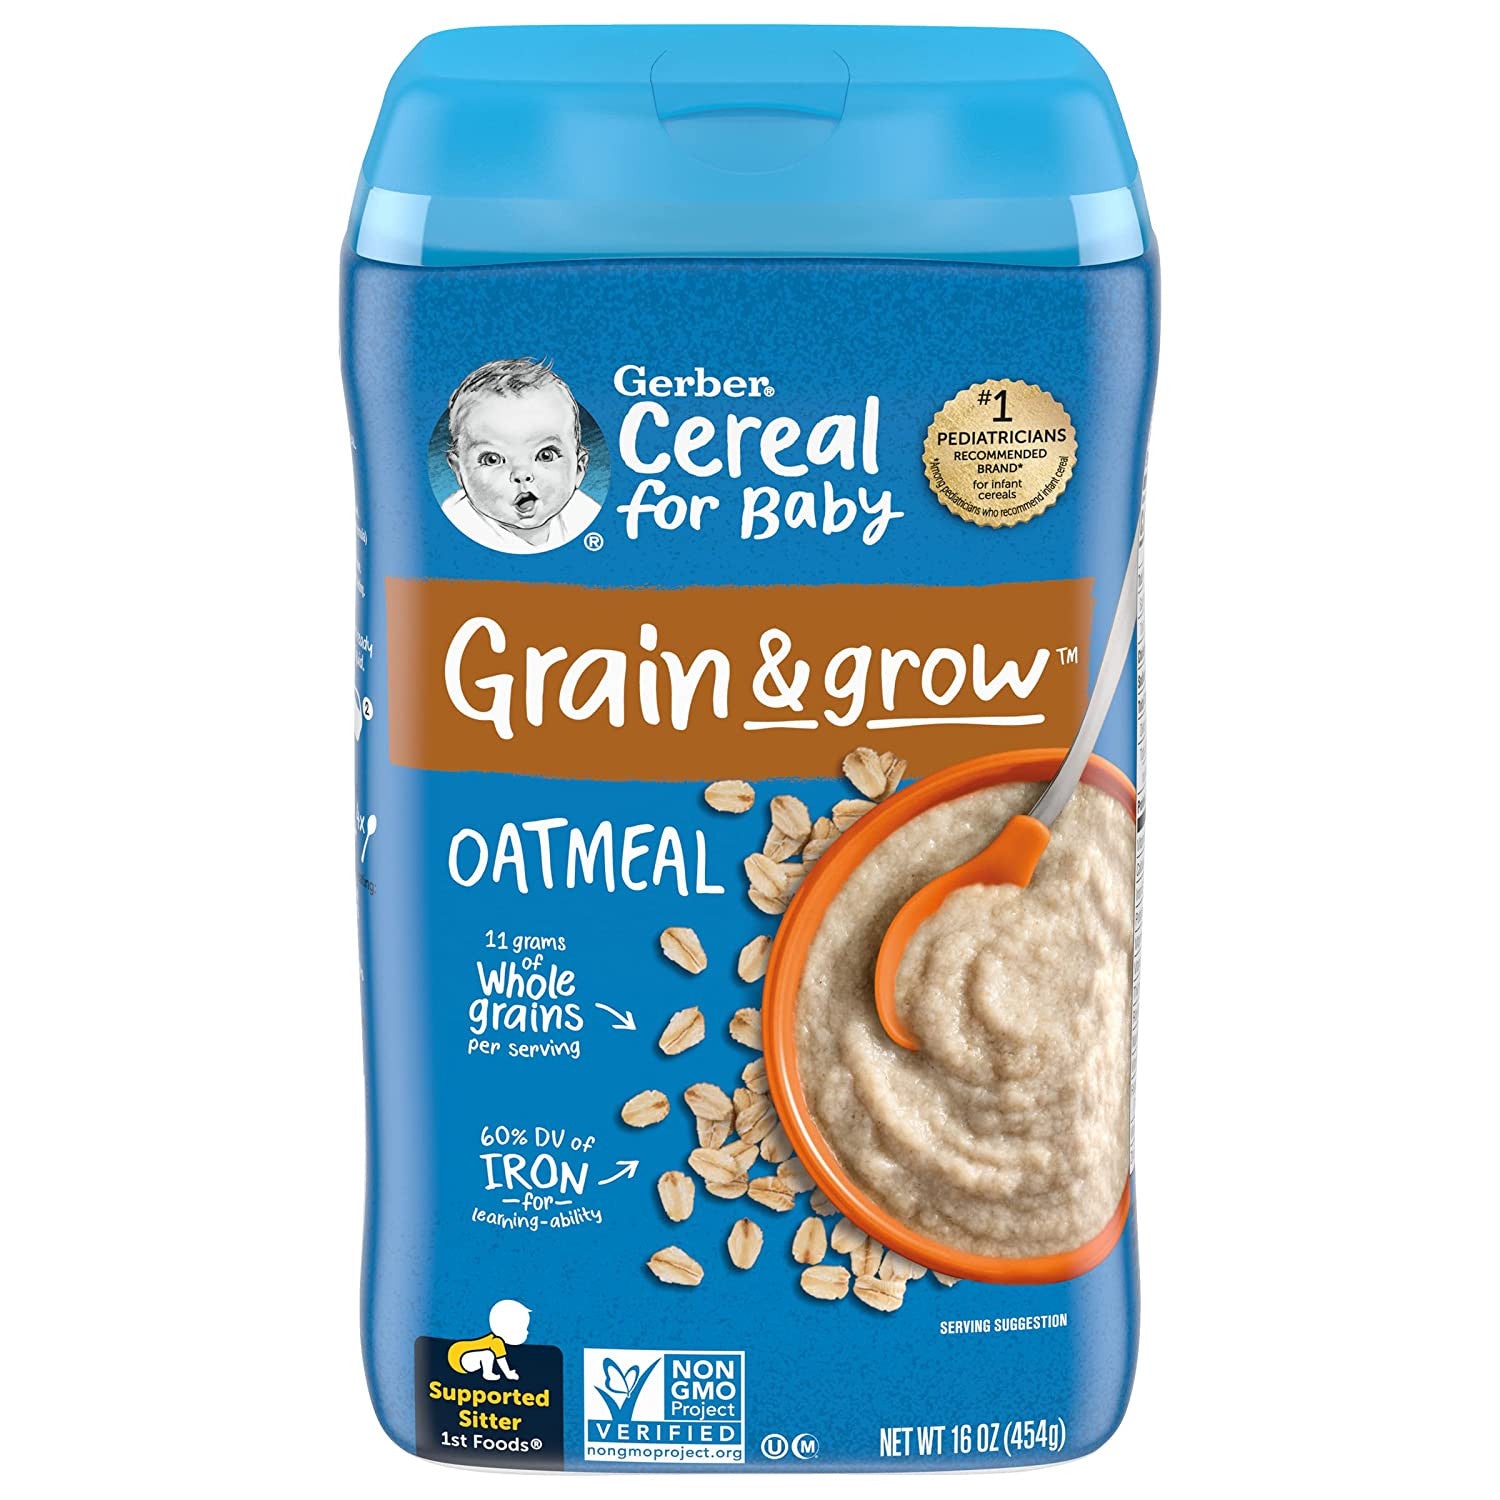 Gerber Baby Cereal 1st Foods Oatmeal Single Grain Cereal 16 oz / 454g